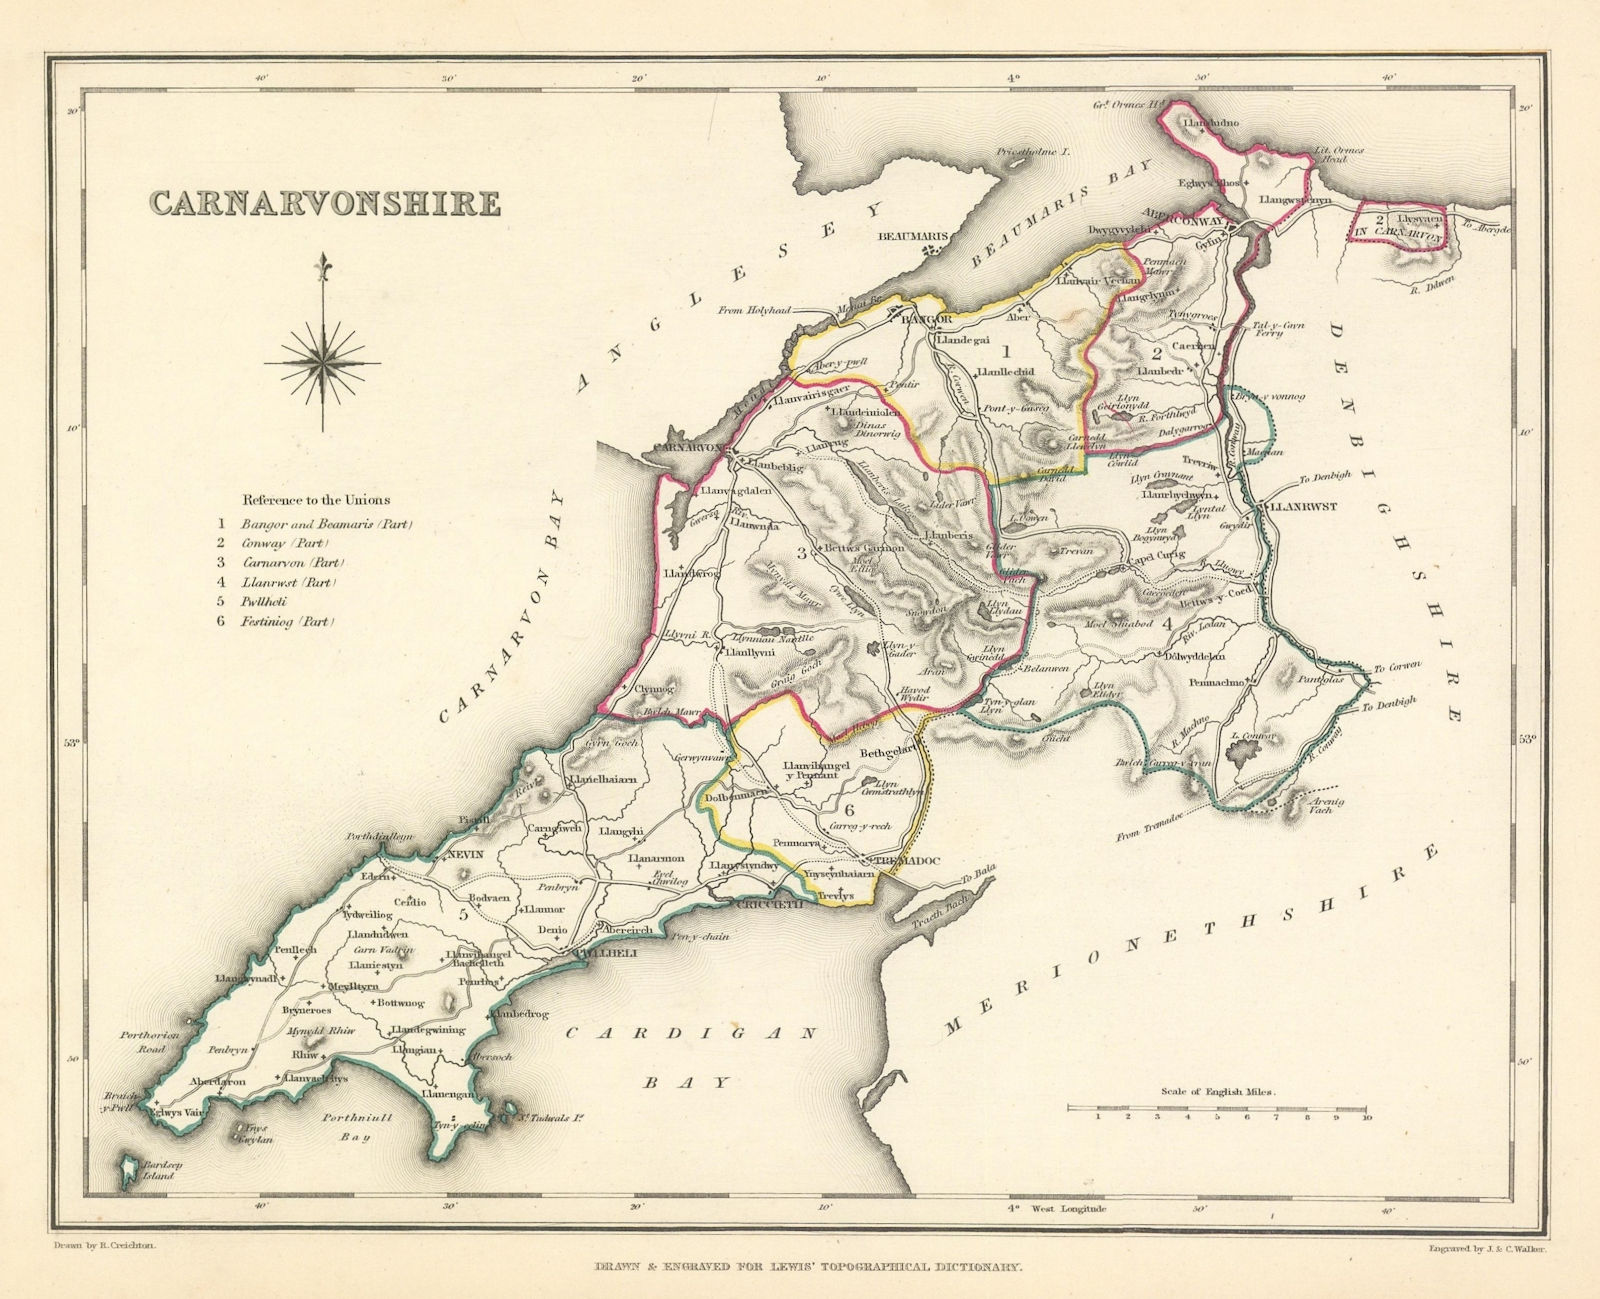 Antique county map of CARNARVONSHIRE by Creighton & Walker for Lewis c1840